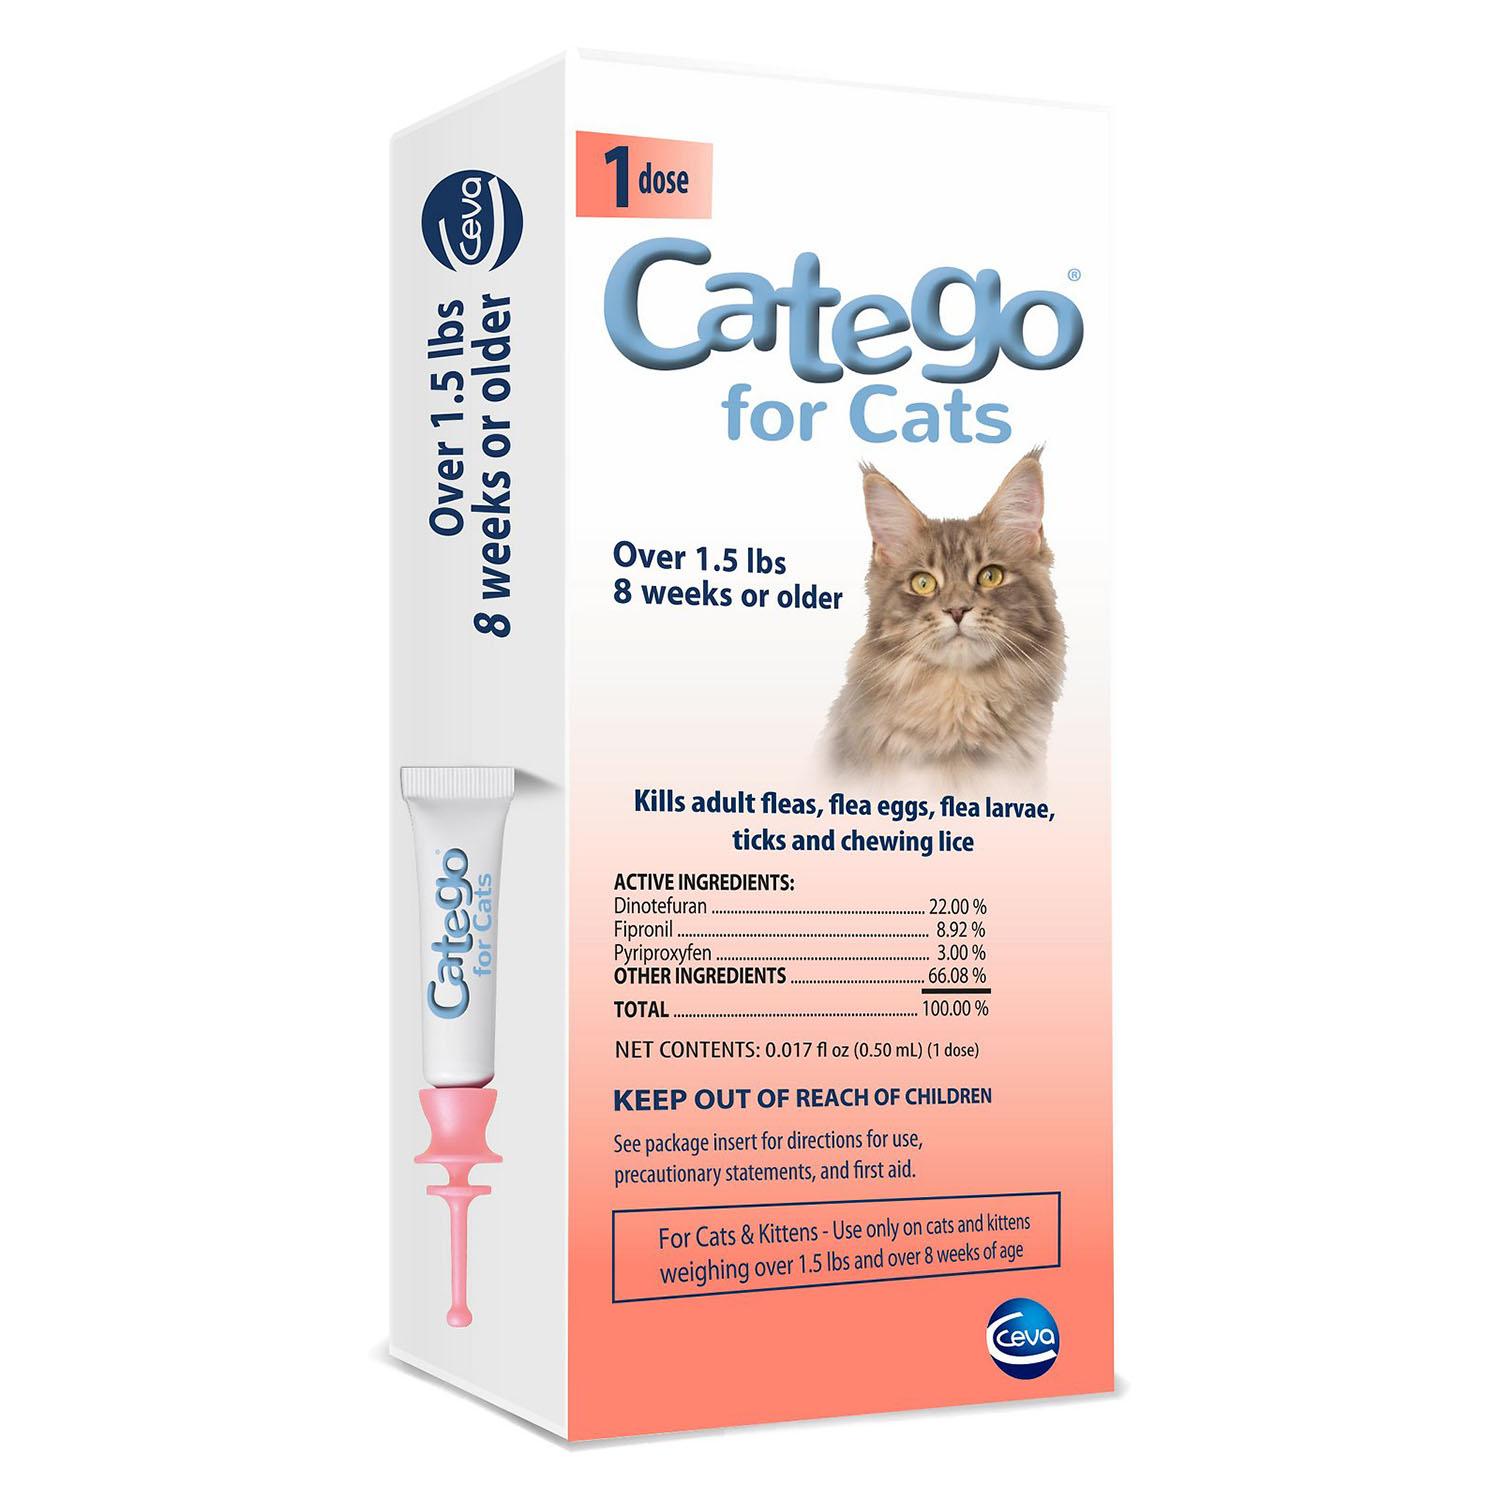 Catego Topical Flea and Tick Treatment for Cats